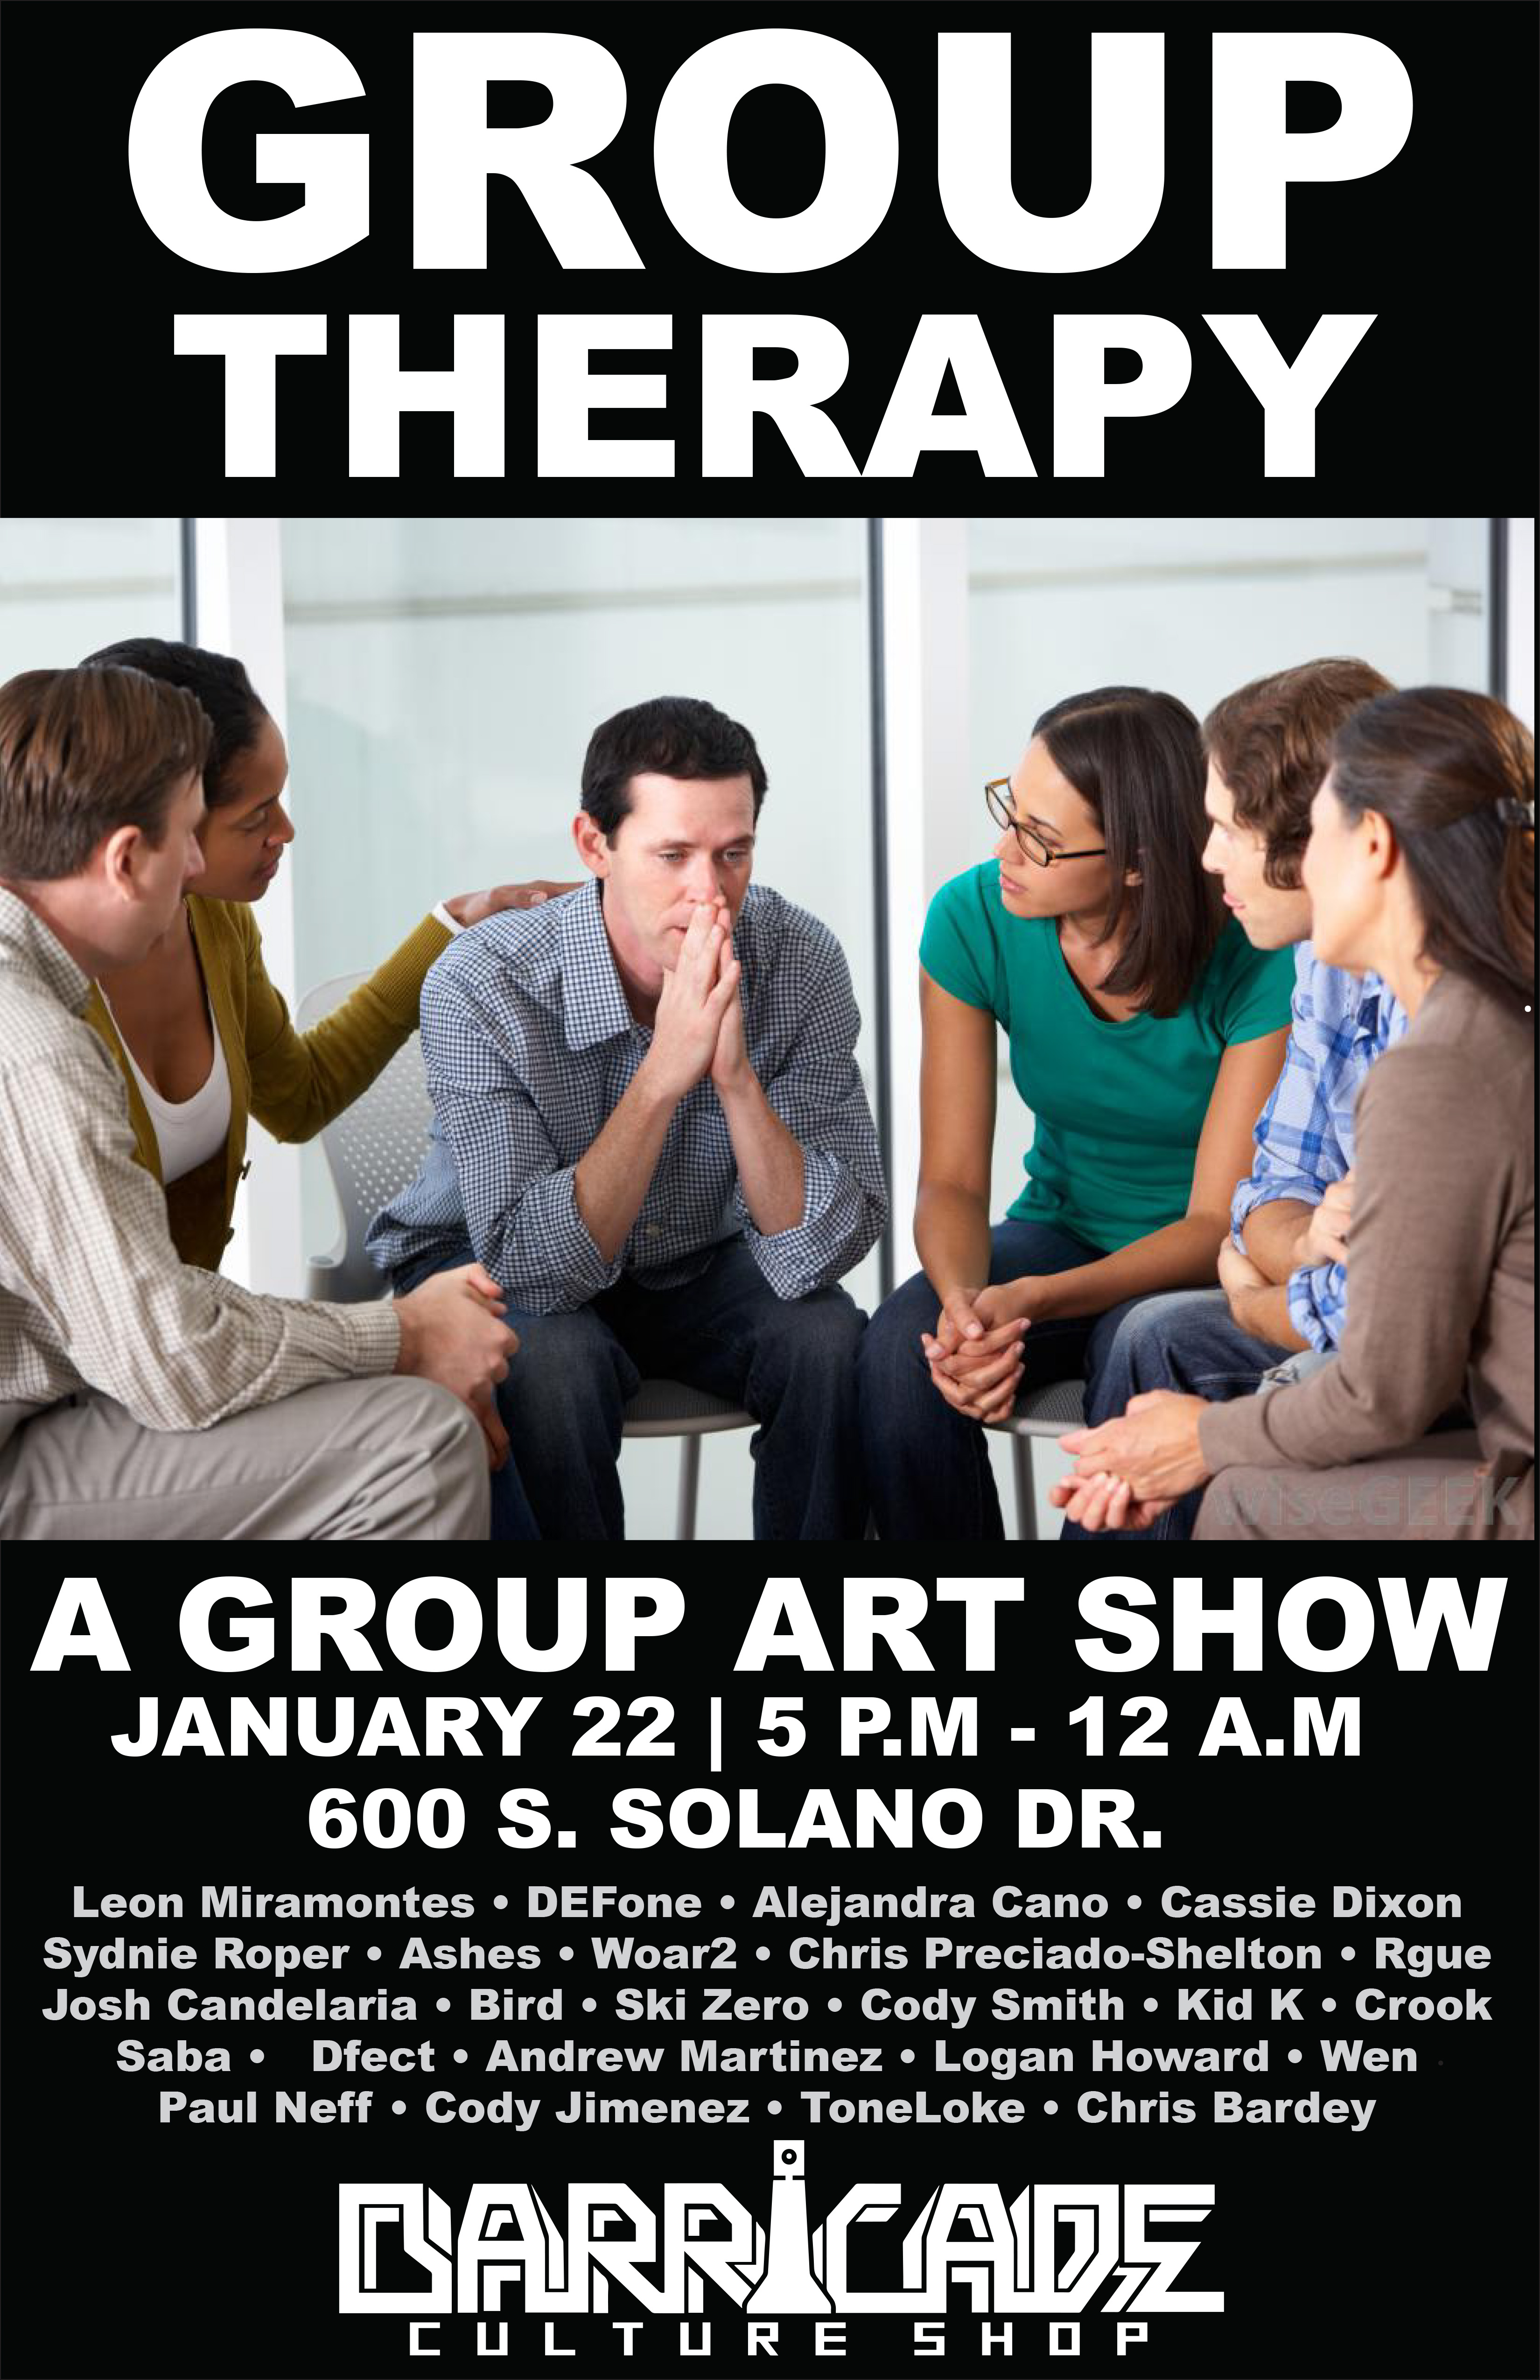 grouptherapy_flyer